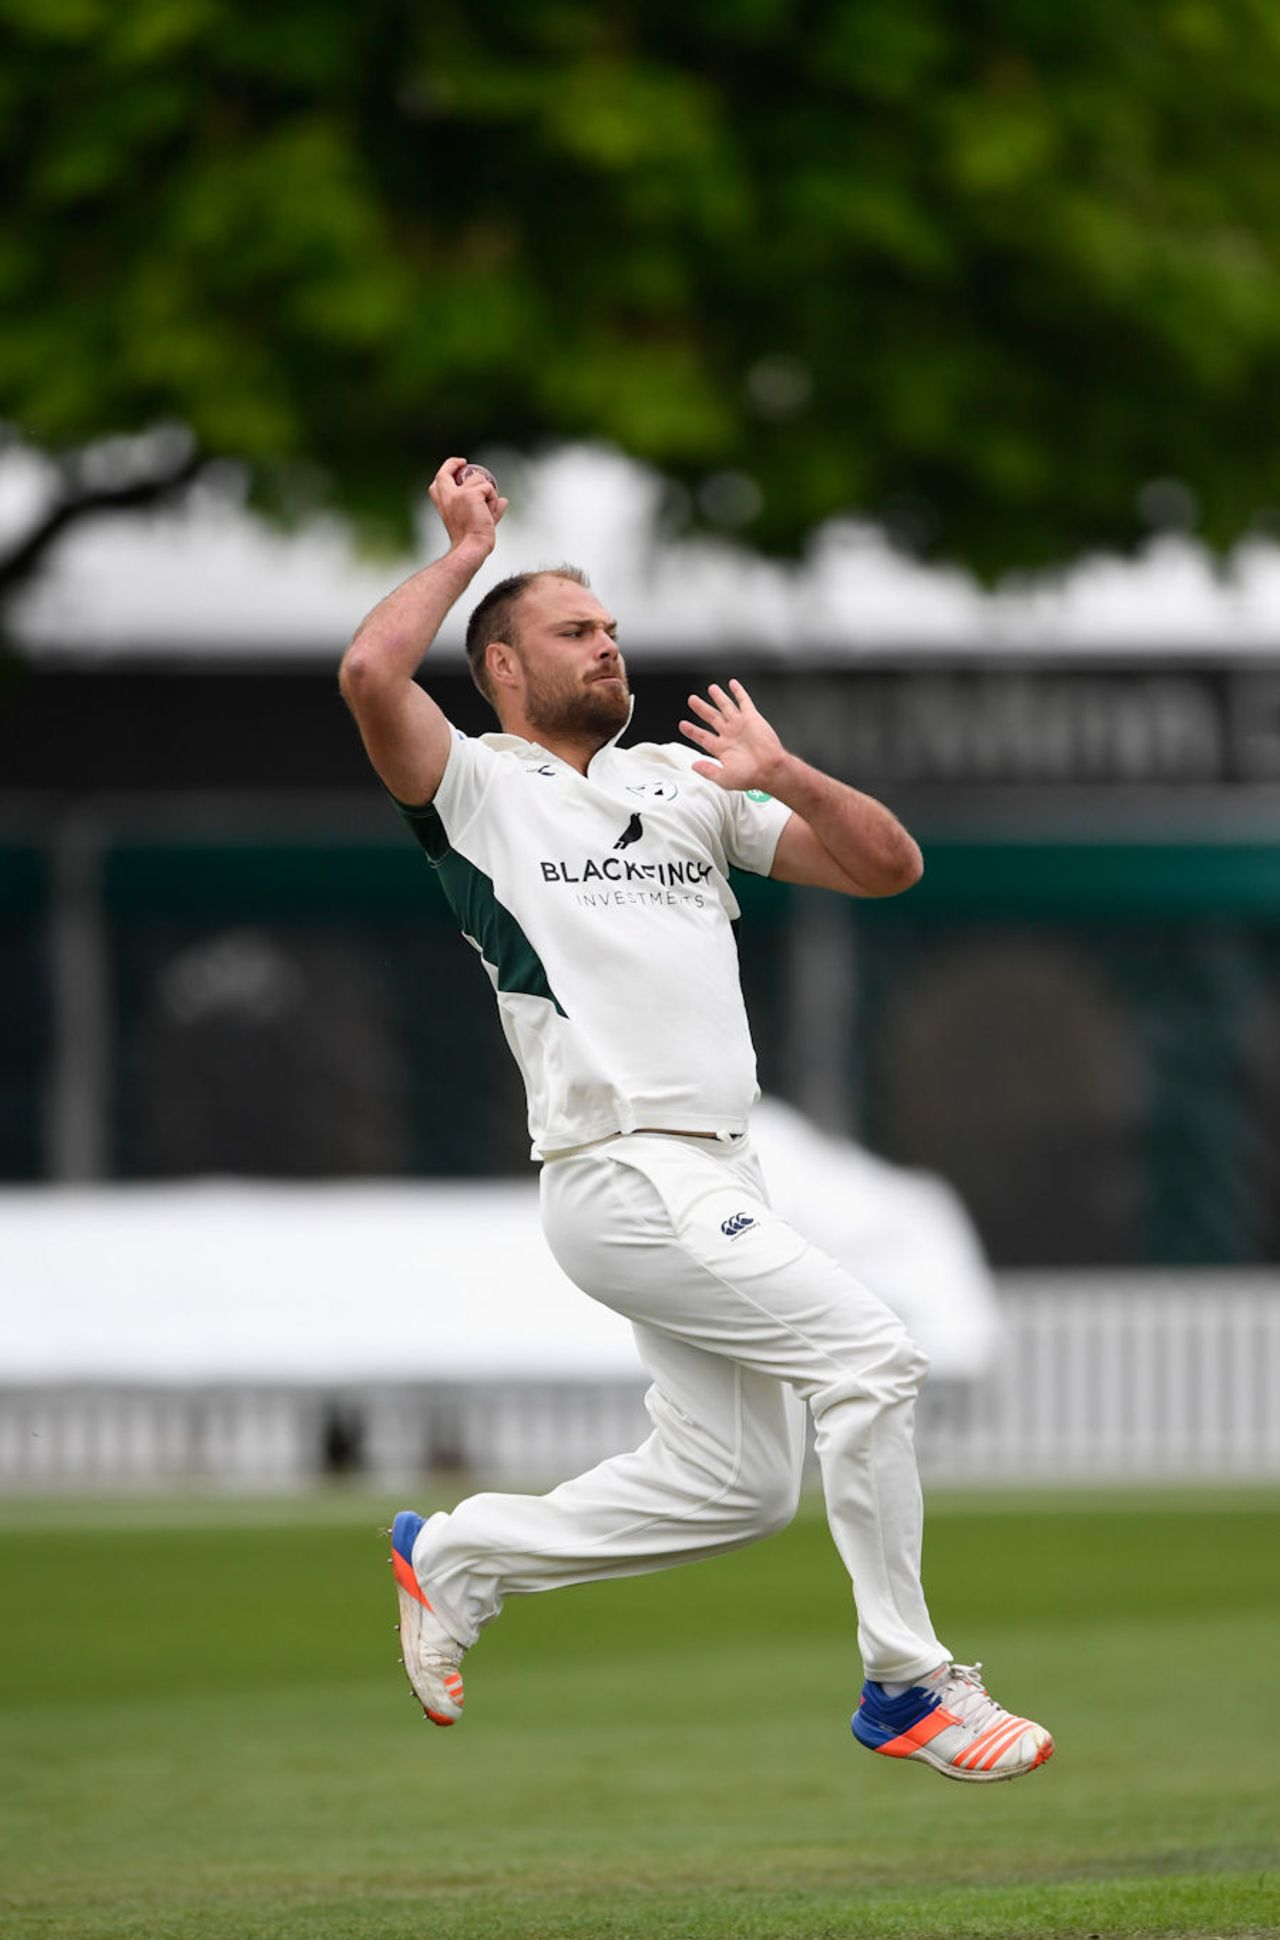 Joe Leach was in typically rumbustious mood, Worcestershire v Northamptonshire, County Championship, Division Two, New Road, 1st day